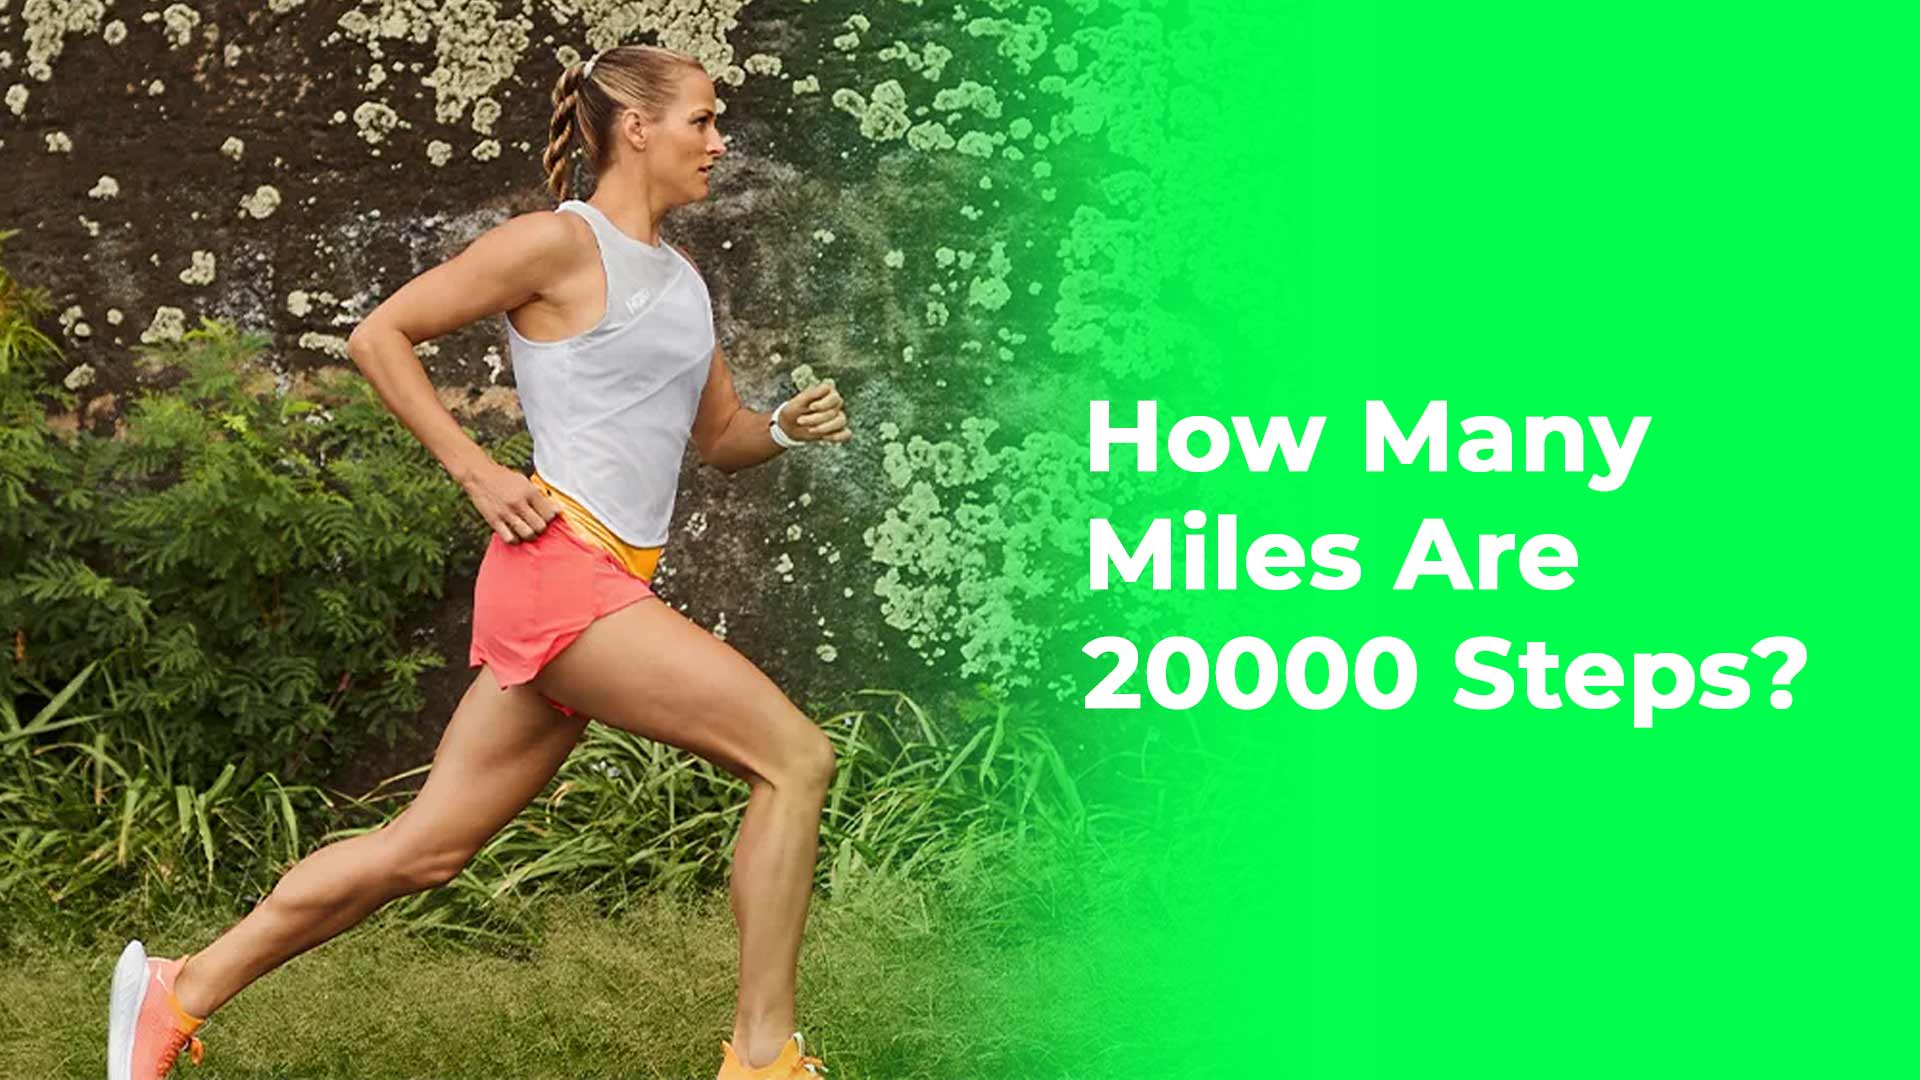 How Many Miles Are 20000 Steps?